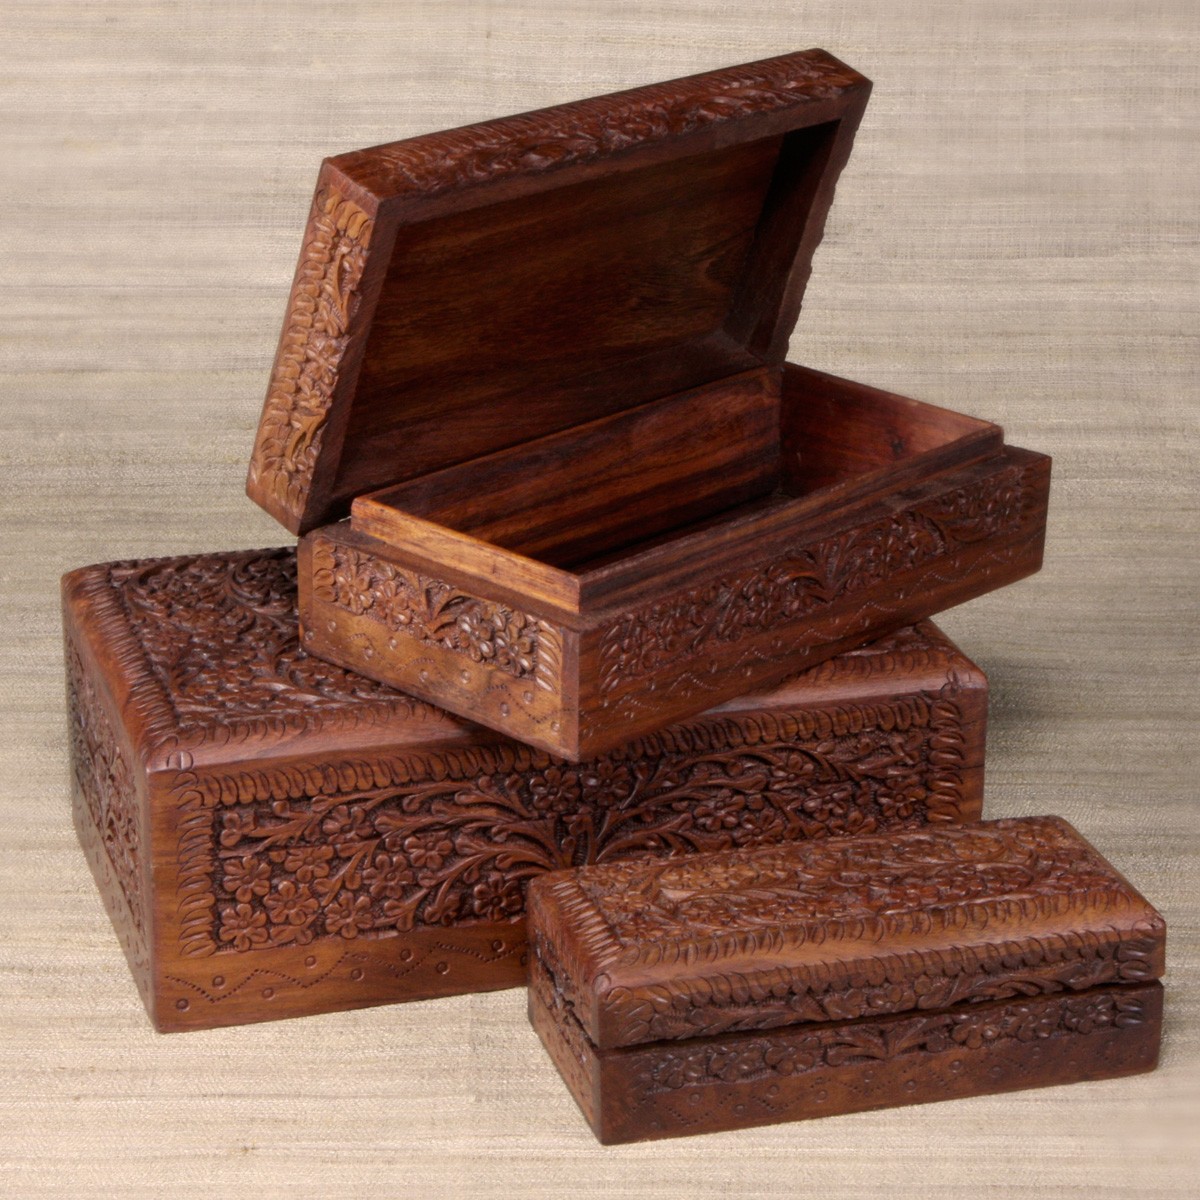 carved wooden incense box